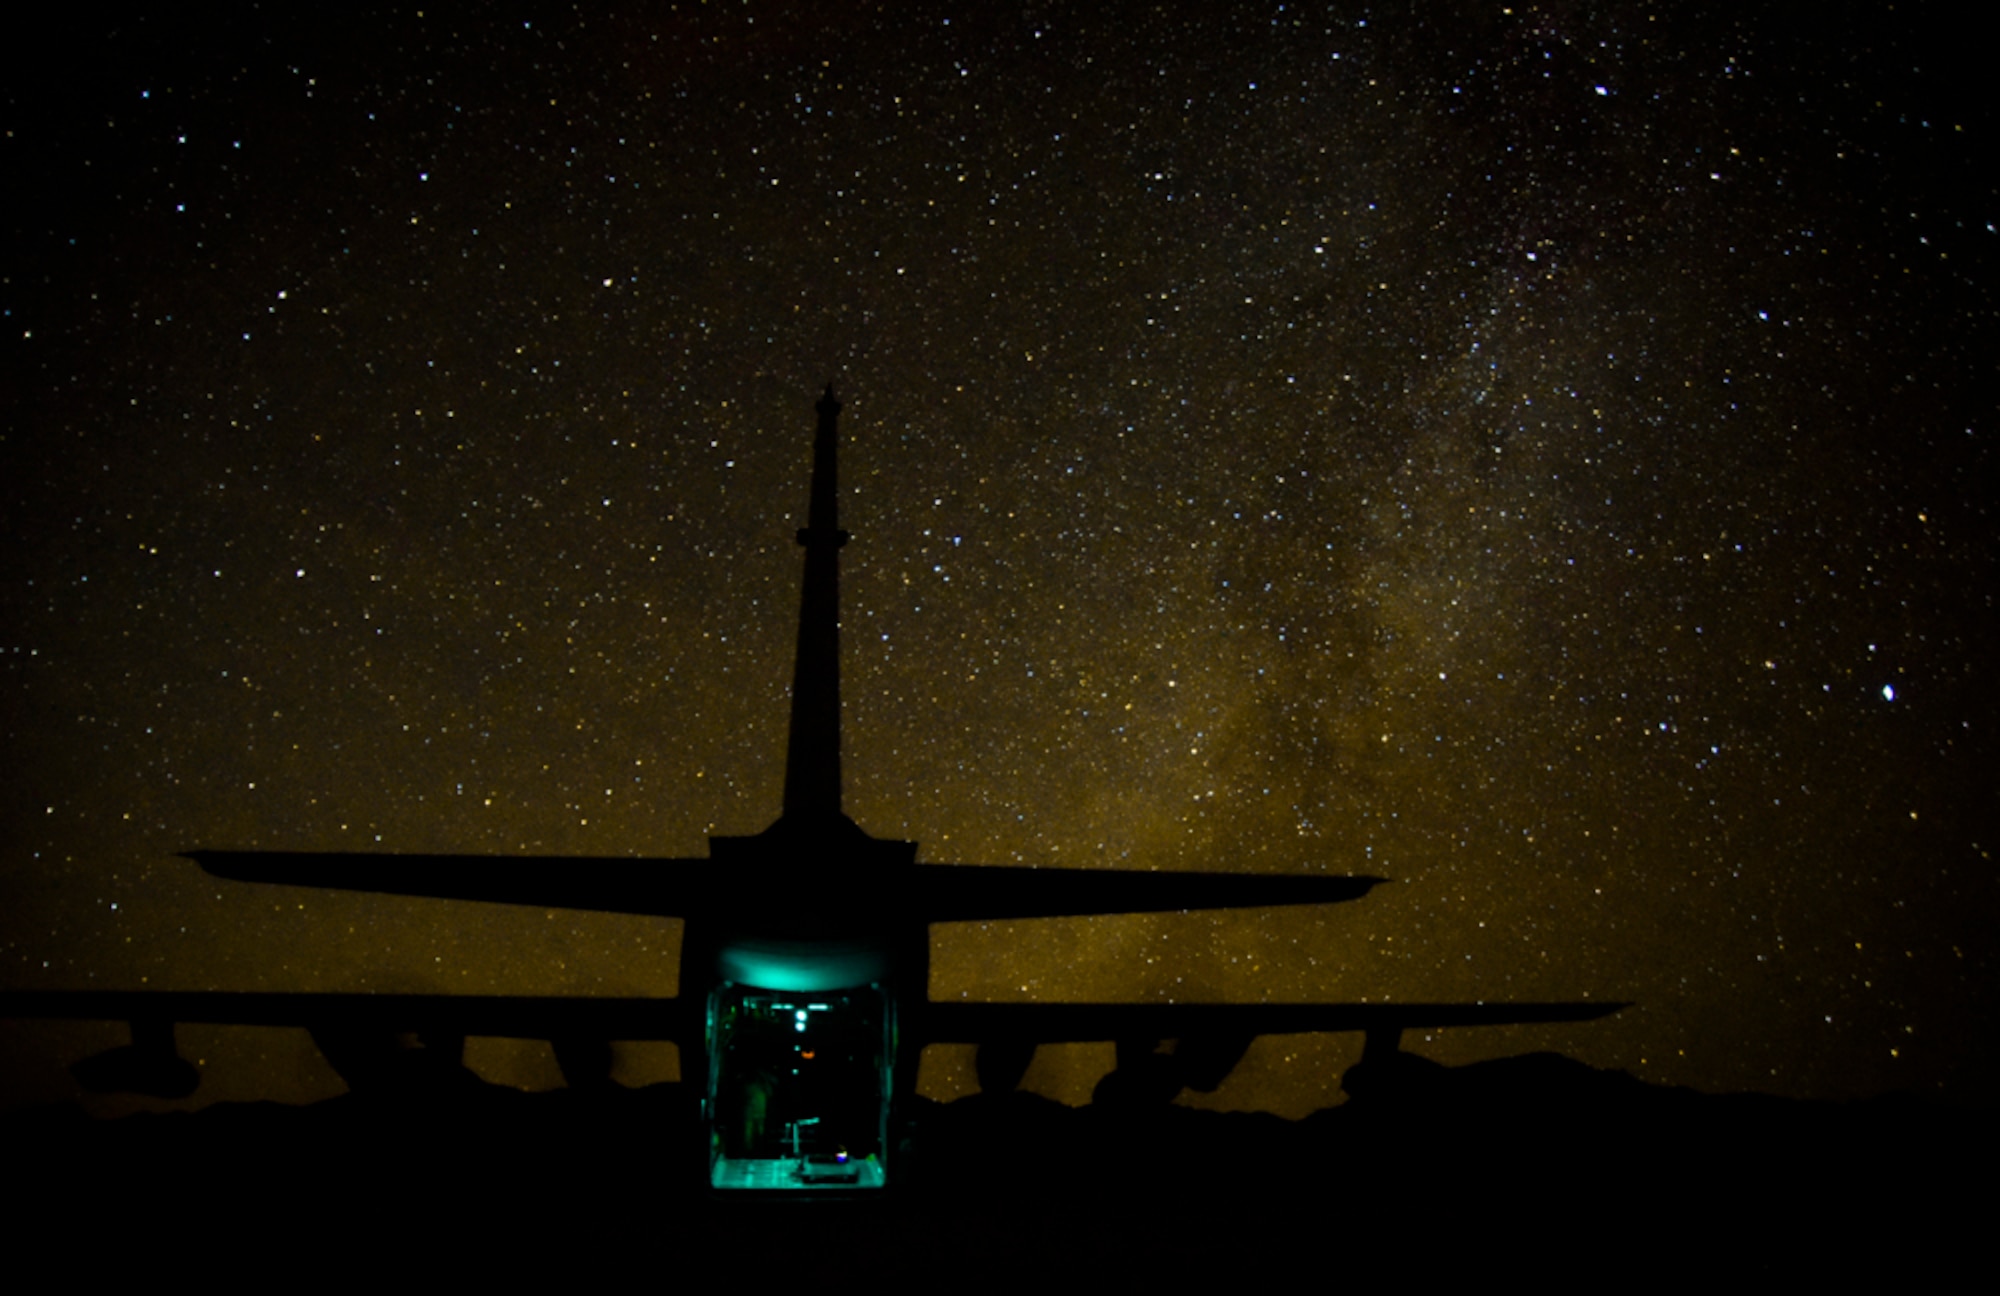 Air Commandos assigned to the 1st Special Operations Squadron Logistic Readiness Squadron, Hurlburt Field, Florida, board an MC-130H Combat Talon II, assigned to the 14th Weapons Squadron, after establishing a forward arming and refueling point during Coyote Freedom 401, Dec. 12, 2017, at the Nevada Test and Training Range. The MC-130H is a variant of the C-130 Hercules with added in-flight refueling capabilities and improved navigation computers that allow it to land or airdrop on small, unmarked runways with pinpoint accuracy. (U.S. Air Force photo by Airman 1st Class Andrew D. Sarver/Released)